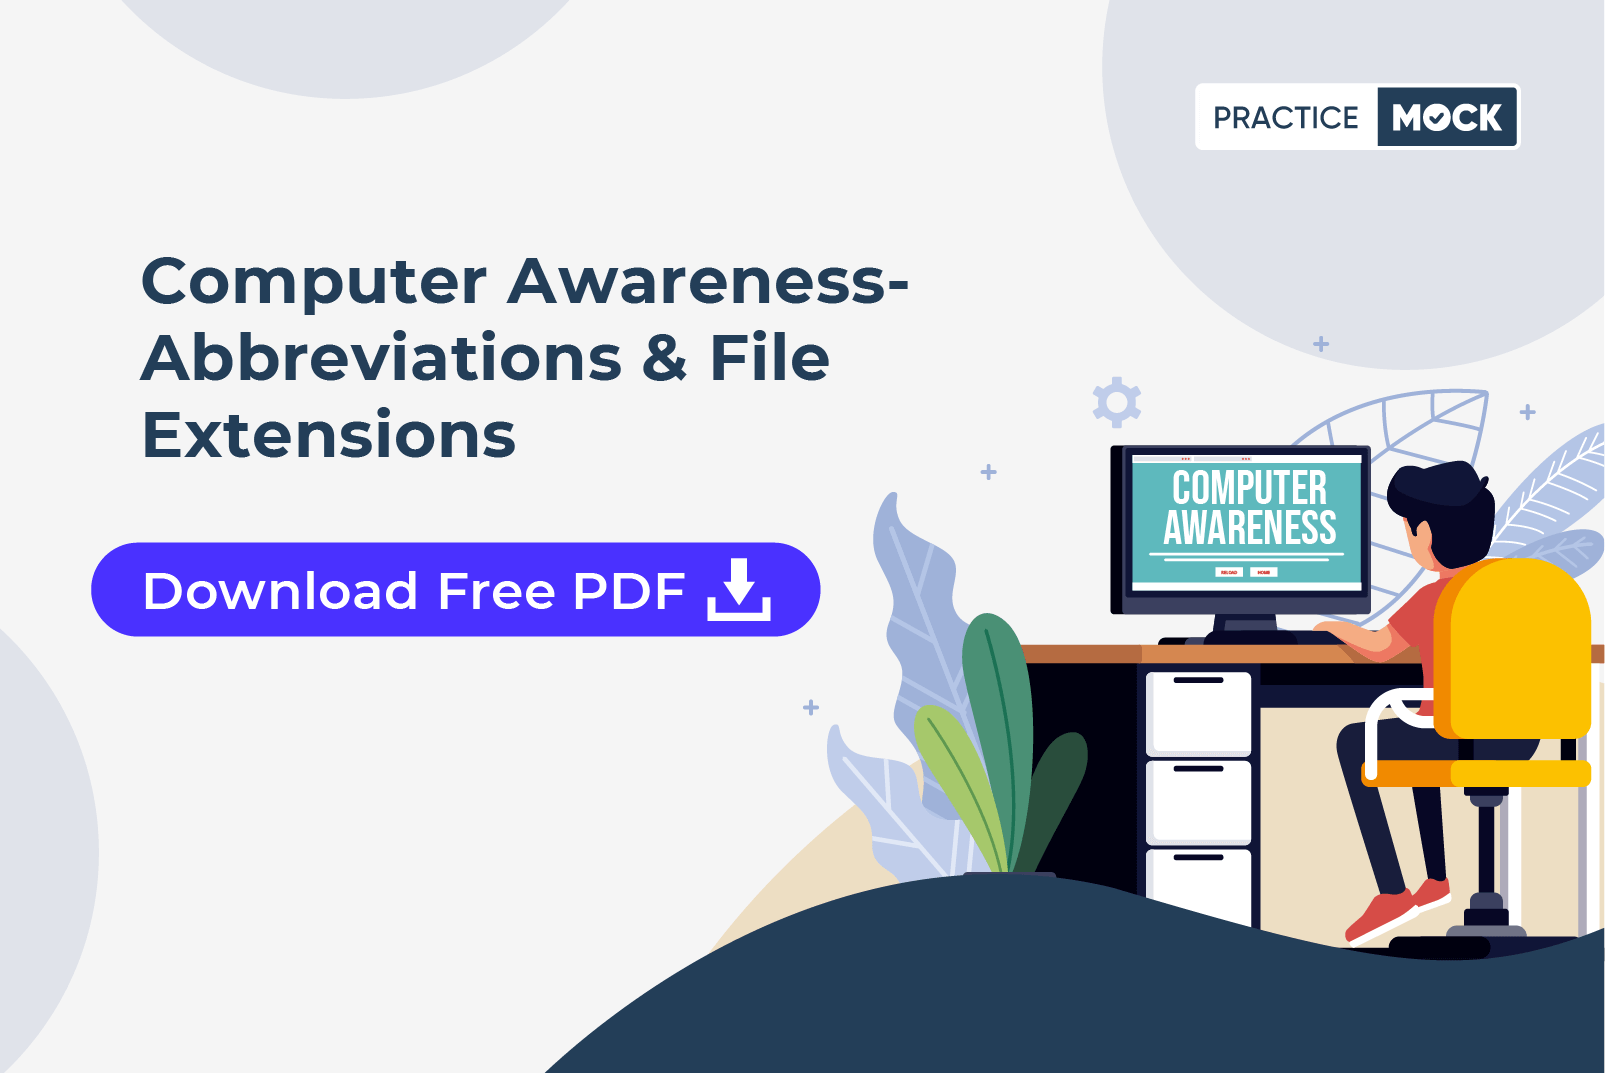 Computer Awareness- Abbreviations & File Extensions- Download Free PDF